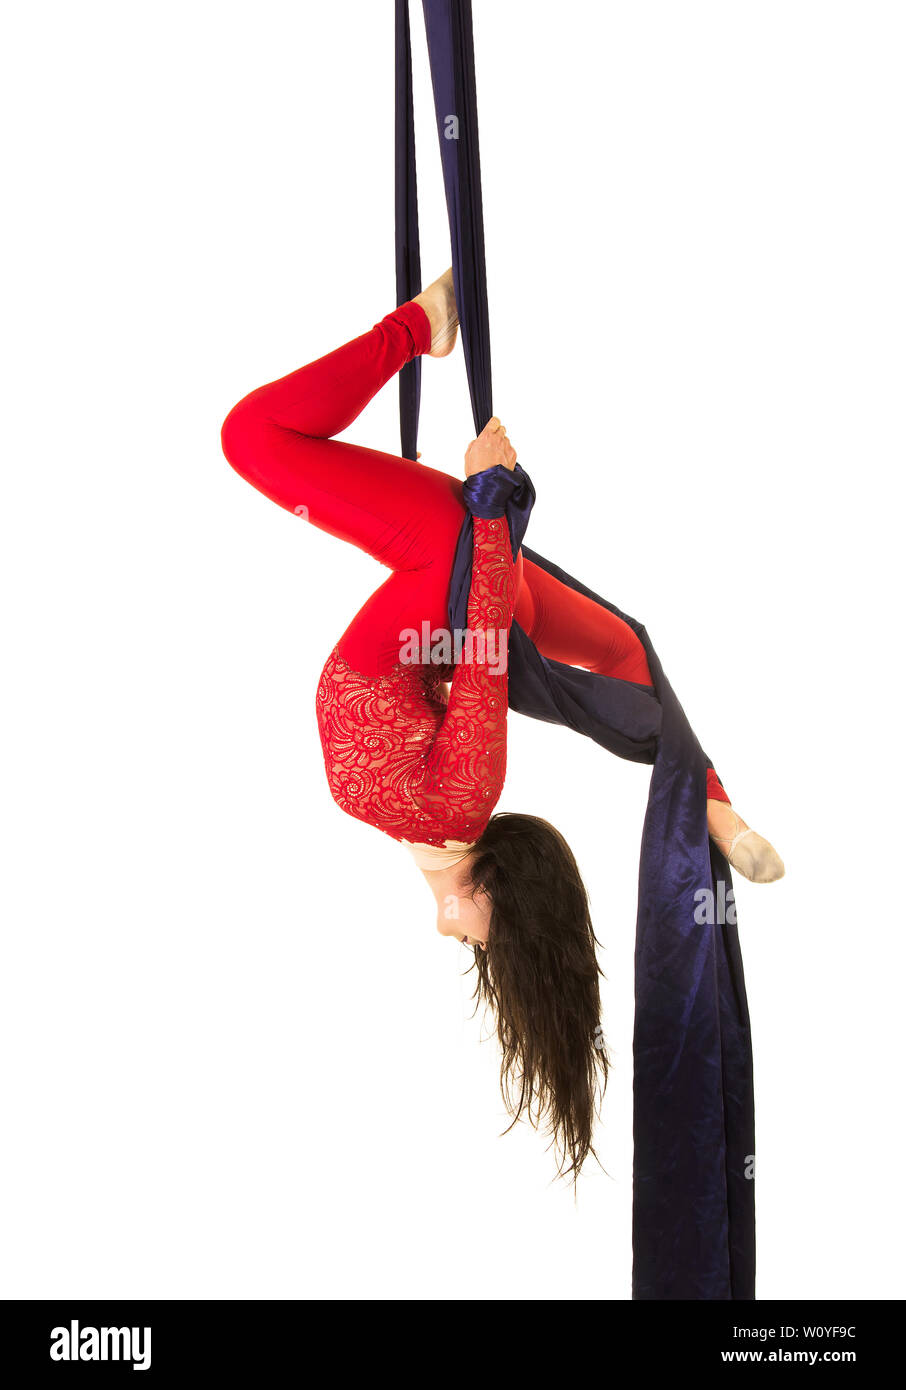 A Young woman with long hair in a red suit performs gymnastic and circus exercises on silk. Studio shooting on white background, isolated image. Stock Photo